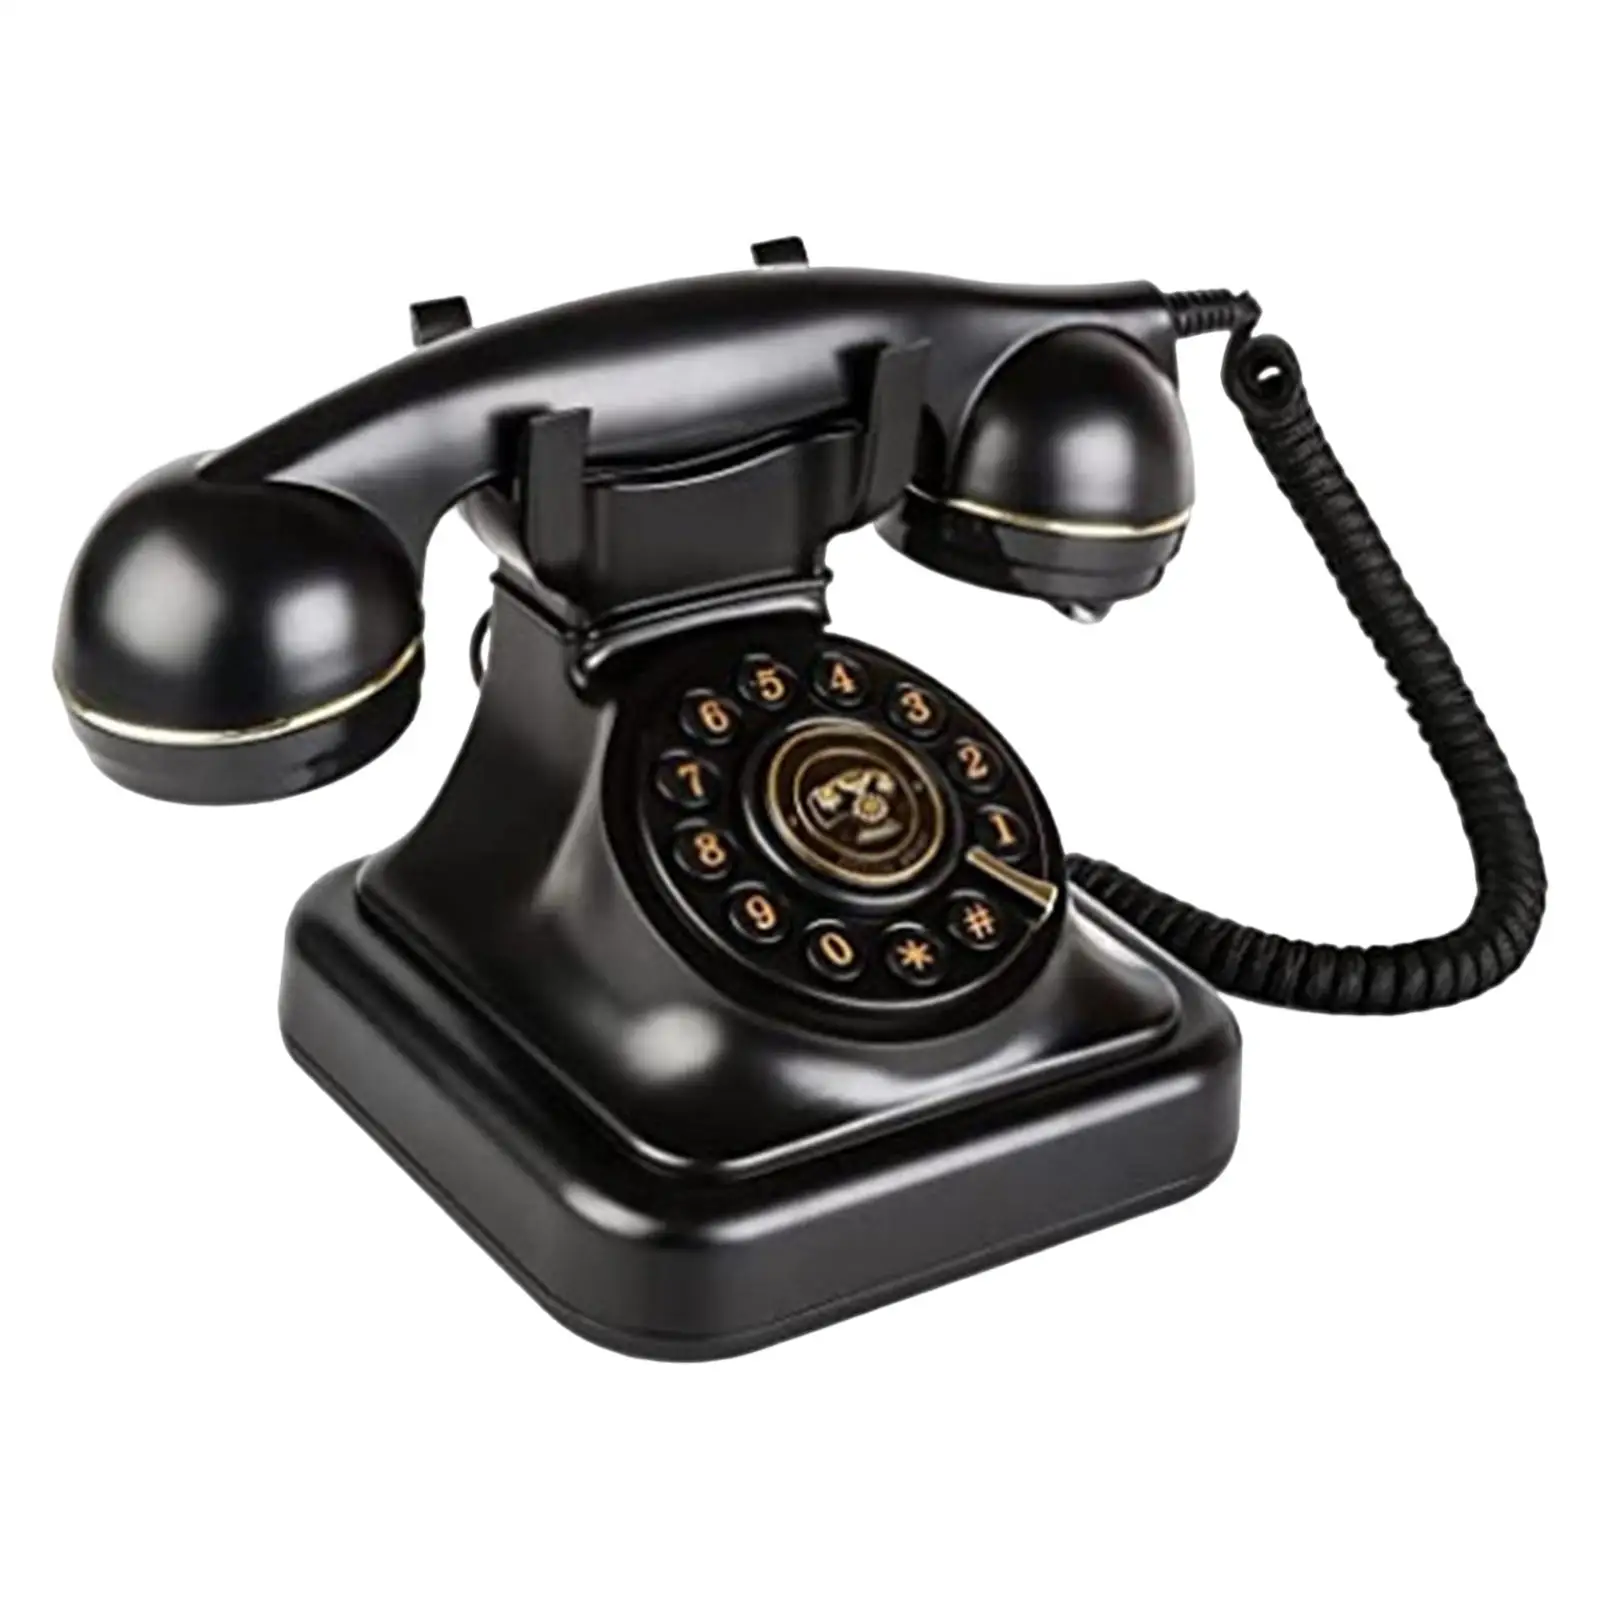 Corded Retro Telephone Landline Phones Old Fashion with Mechanical Bell Push Button Dial for Desk